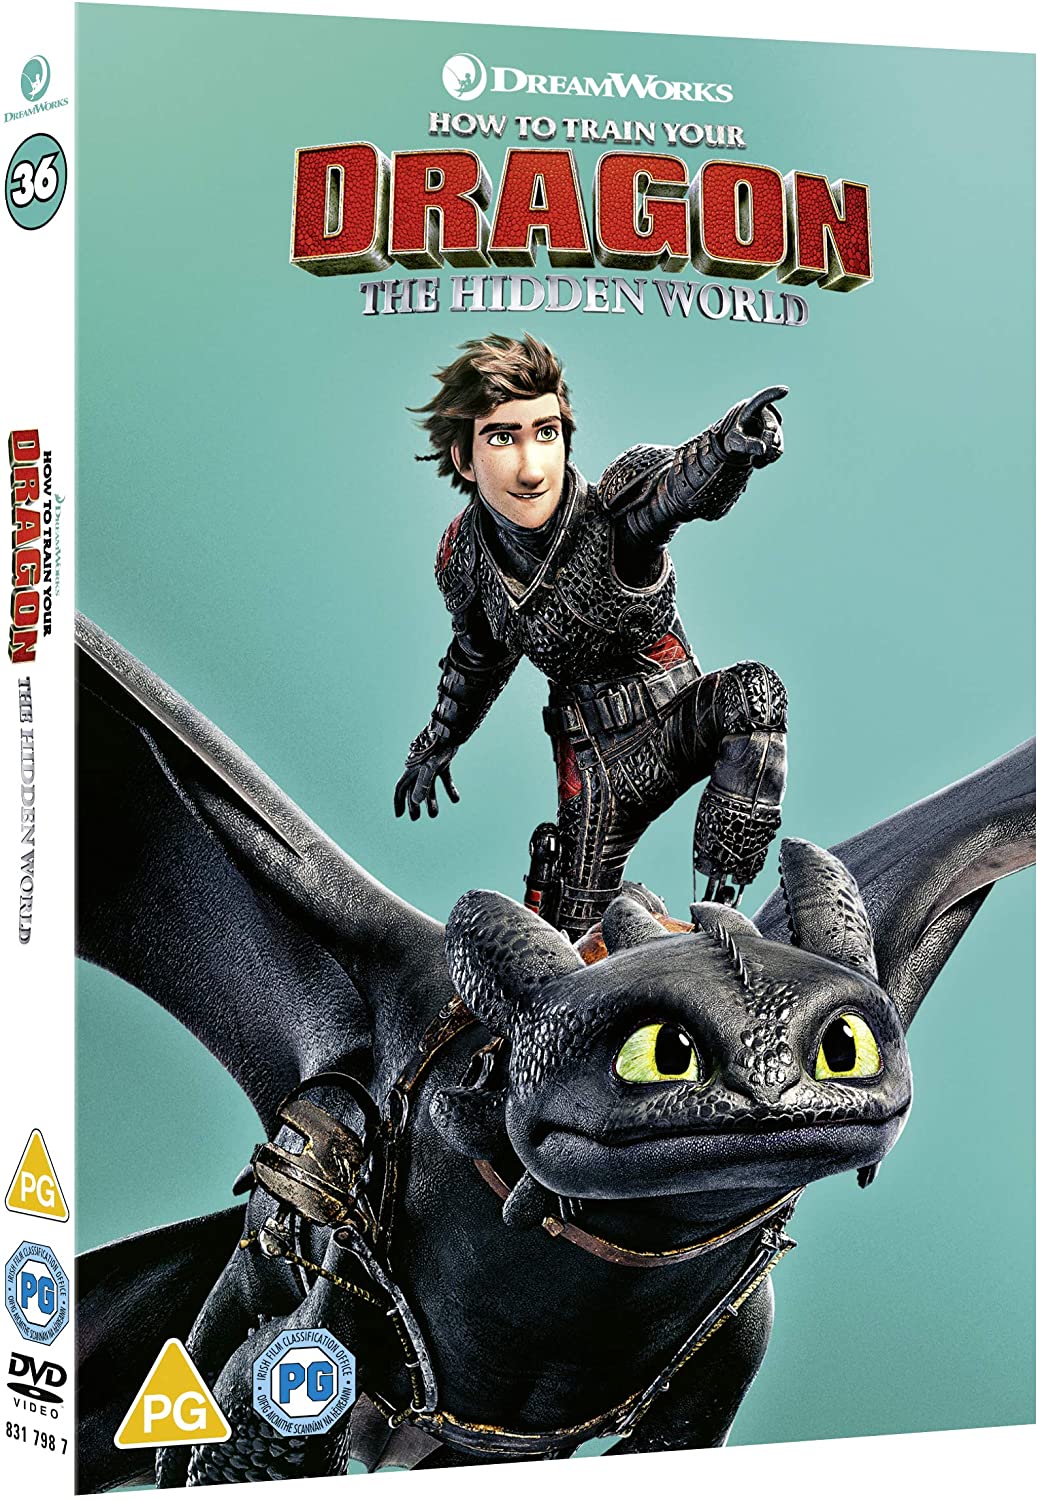 How to Train Your Dragon - The Hidden World - Family/Adventure [DVD]